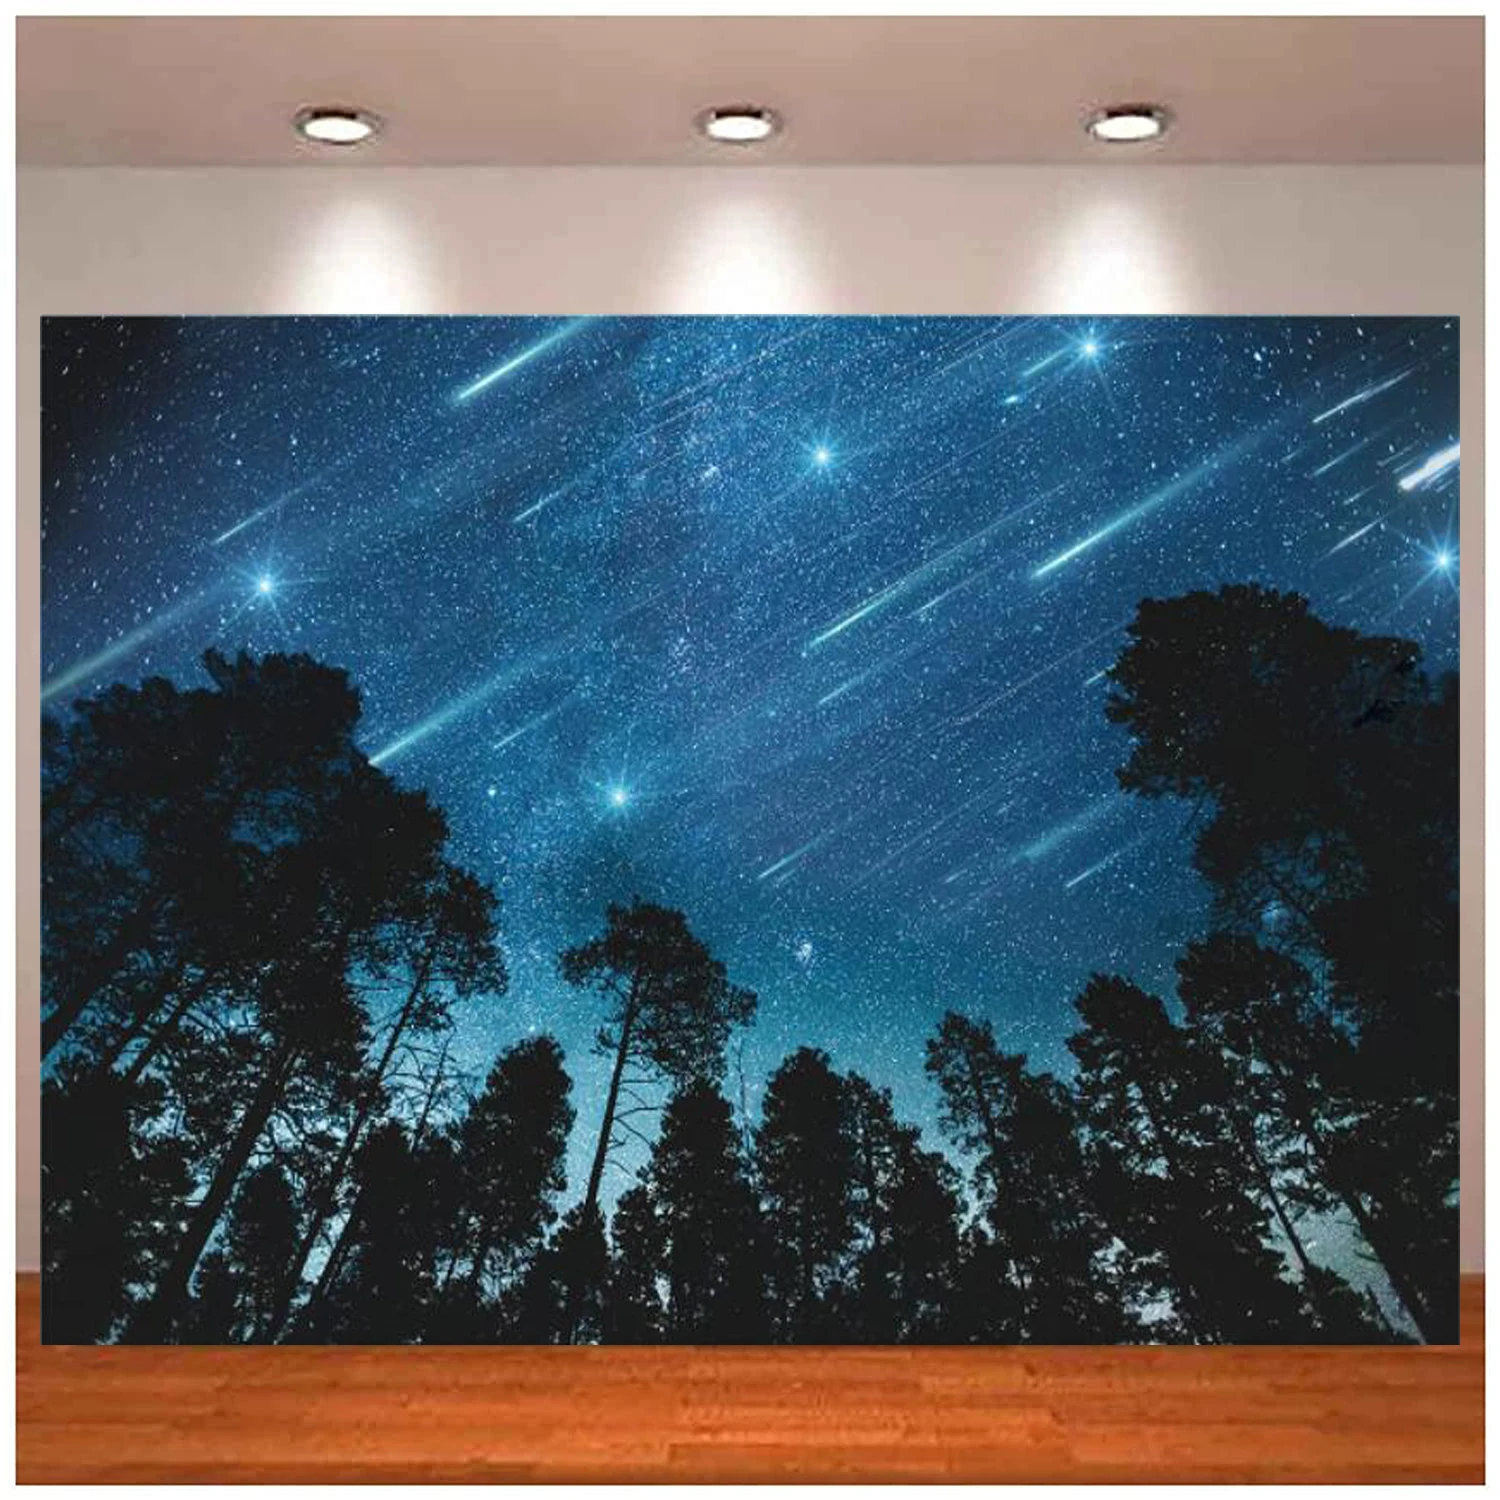 

Photography Backdrop Forest Starry Decor With Galaxy Night Sky Nature Trees Landscape For Dorm Living Room Bedroom Decor Banner